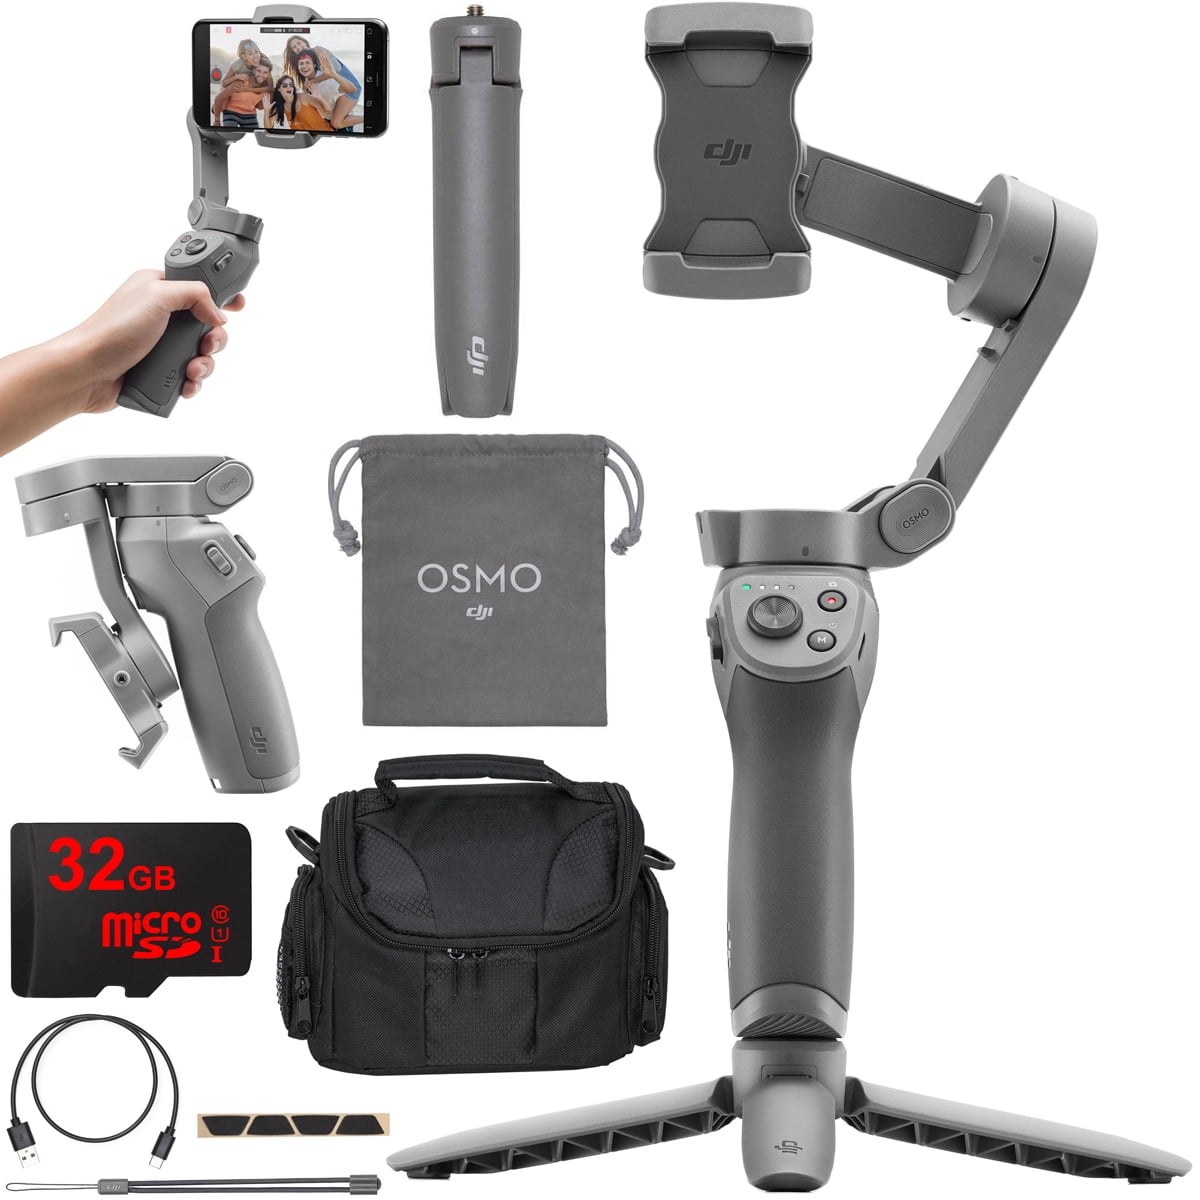 DJI OSMO Mobile 3 Combo Lightweight and Portable 3-Axis Handheld